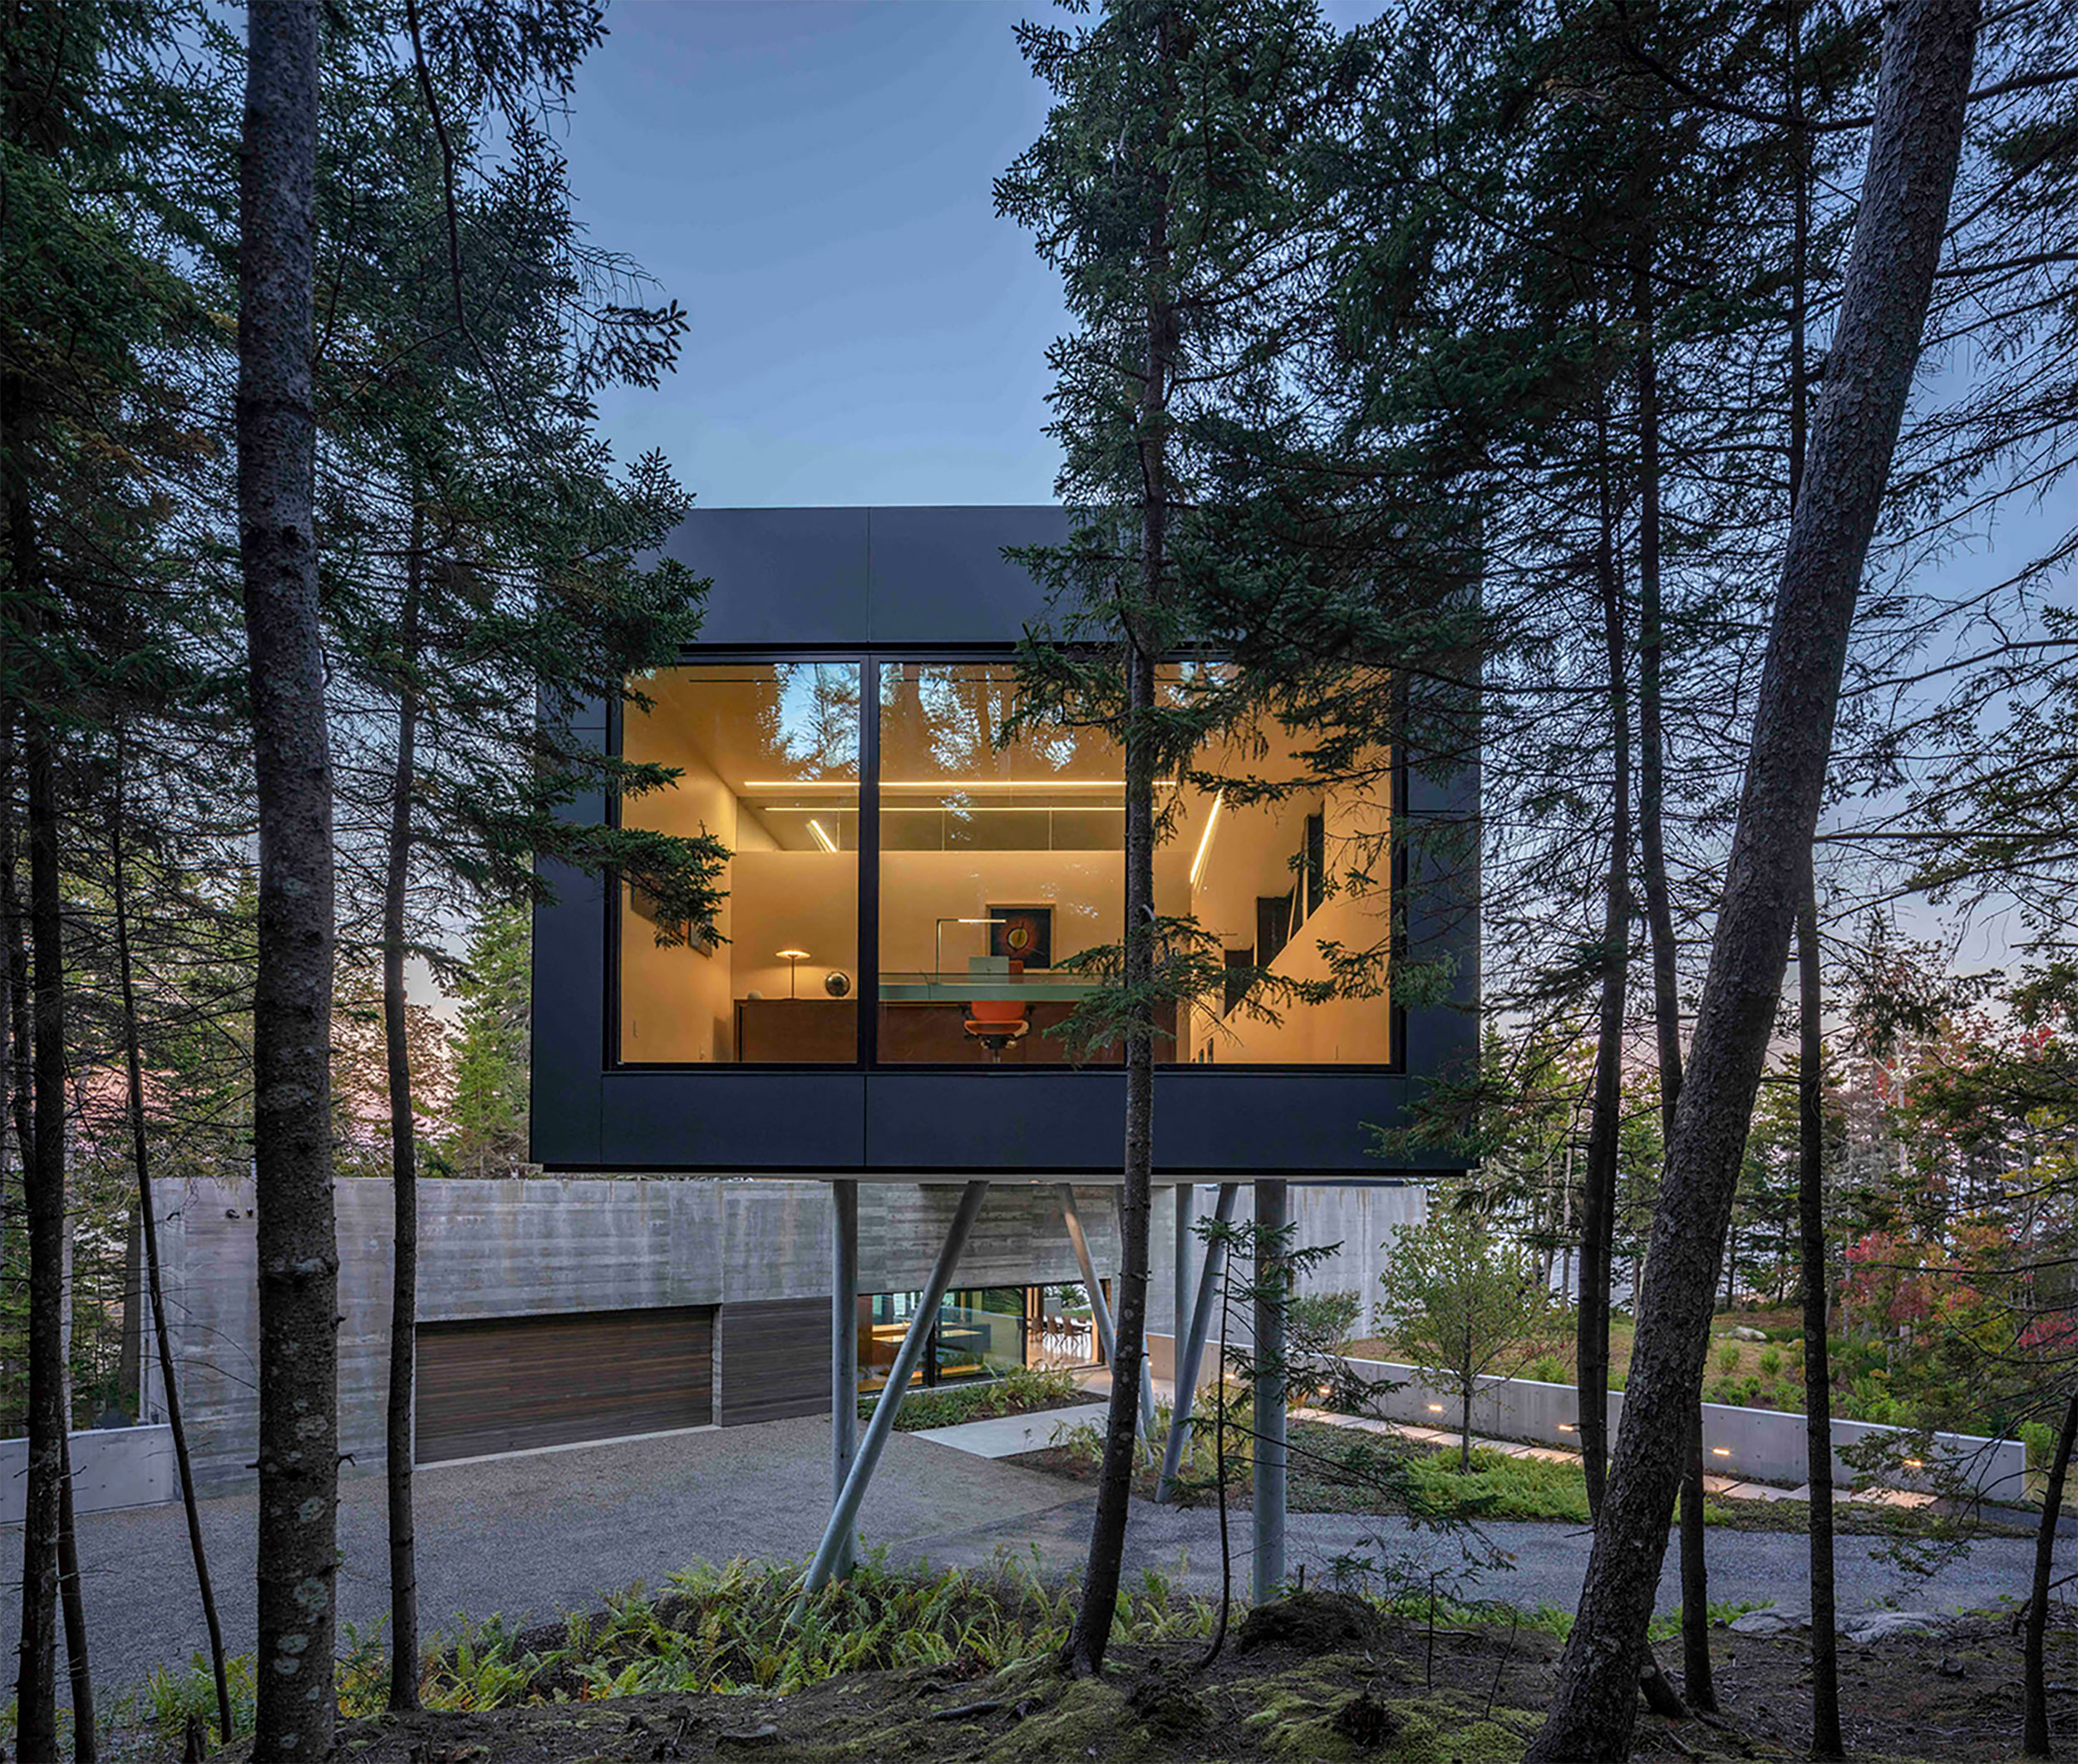 A wing of a modern house juts into the trees and appears as though suspended over another volume of the house